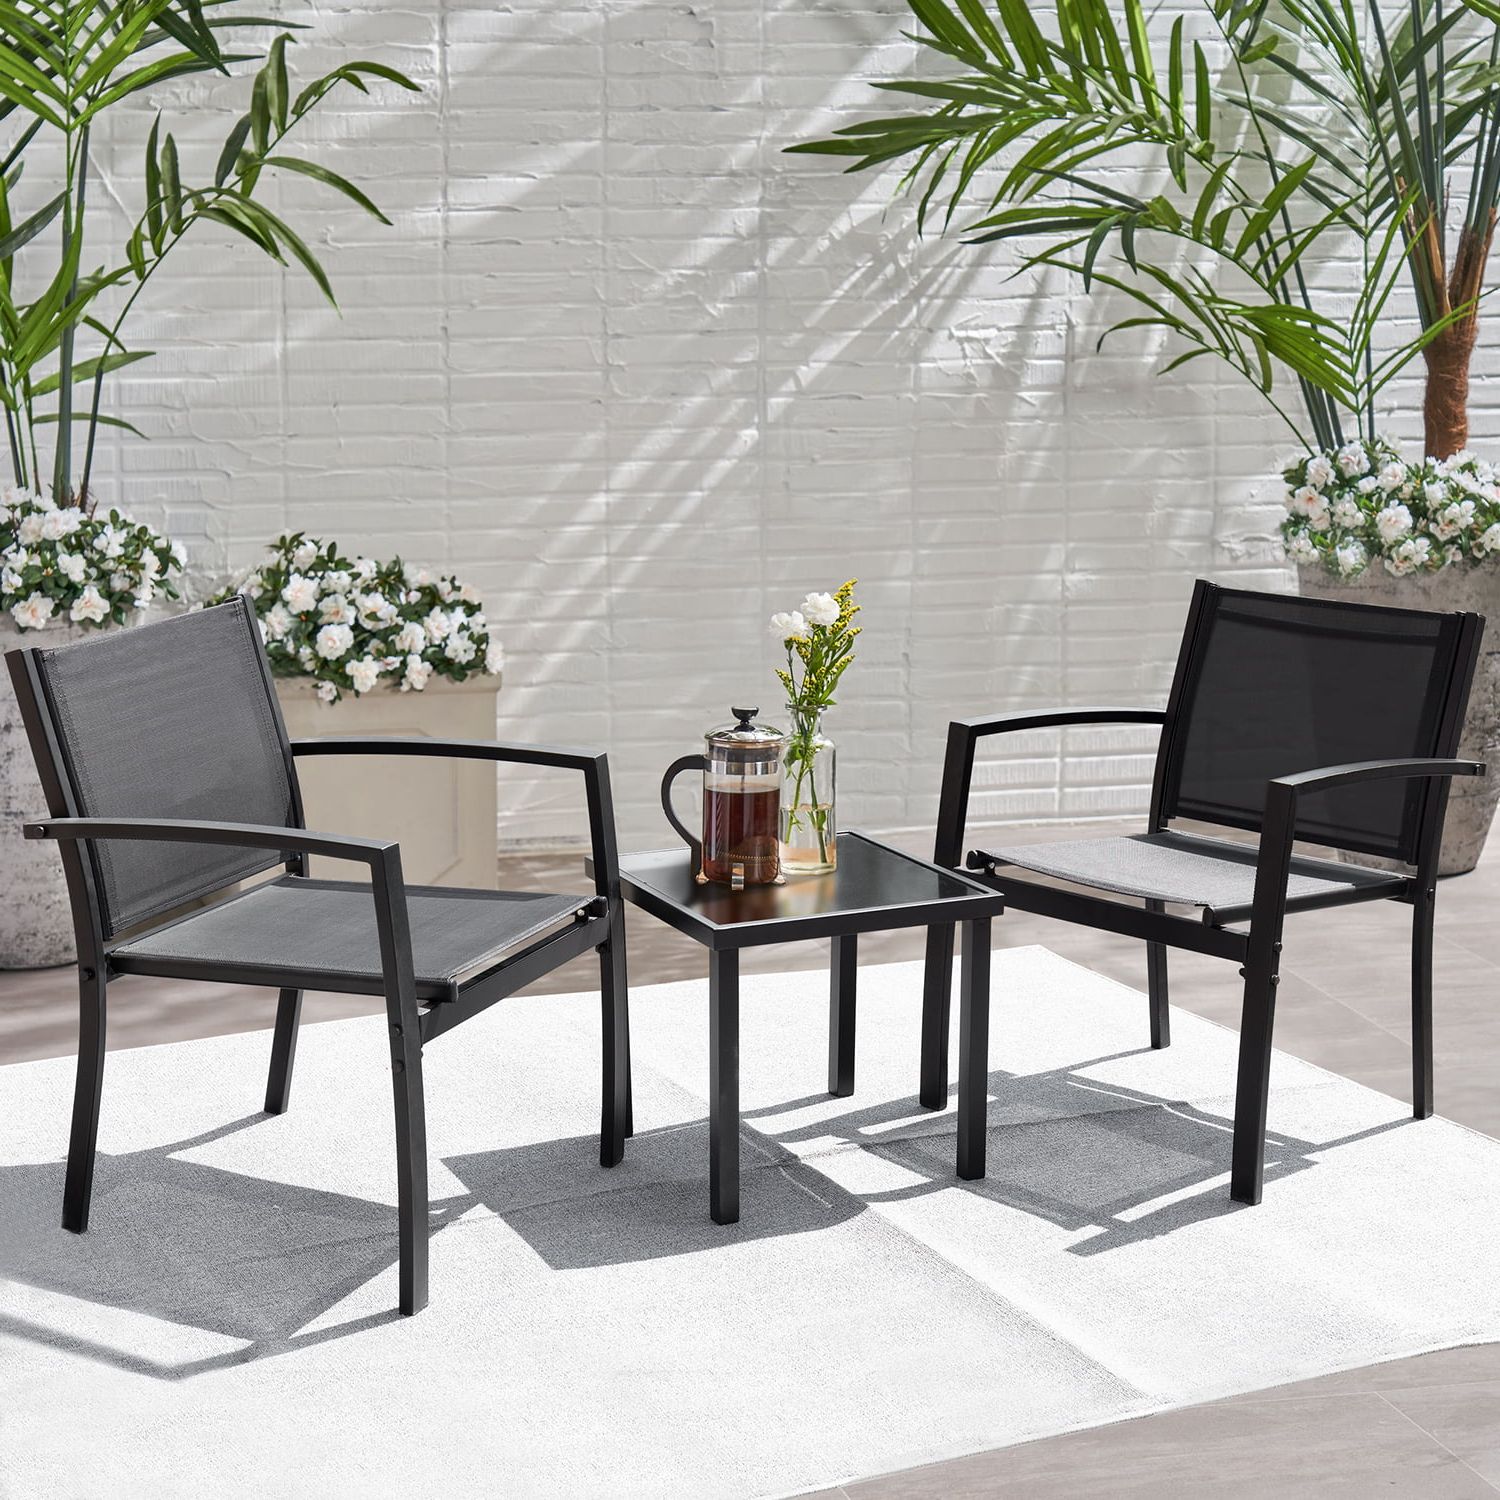 Lacoo 3 Pieces Patio Conversation Set Bistro Set Morden Furniture Set With  Table, Balck,textilene Fabric & Steel Frame – Walmart Intended For Well Known Textilene Bistro Set Modern Conversation Set (Photo 10 of 15)